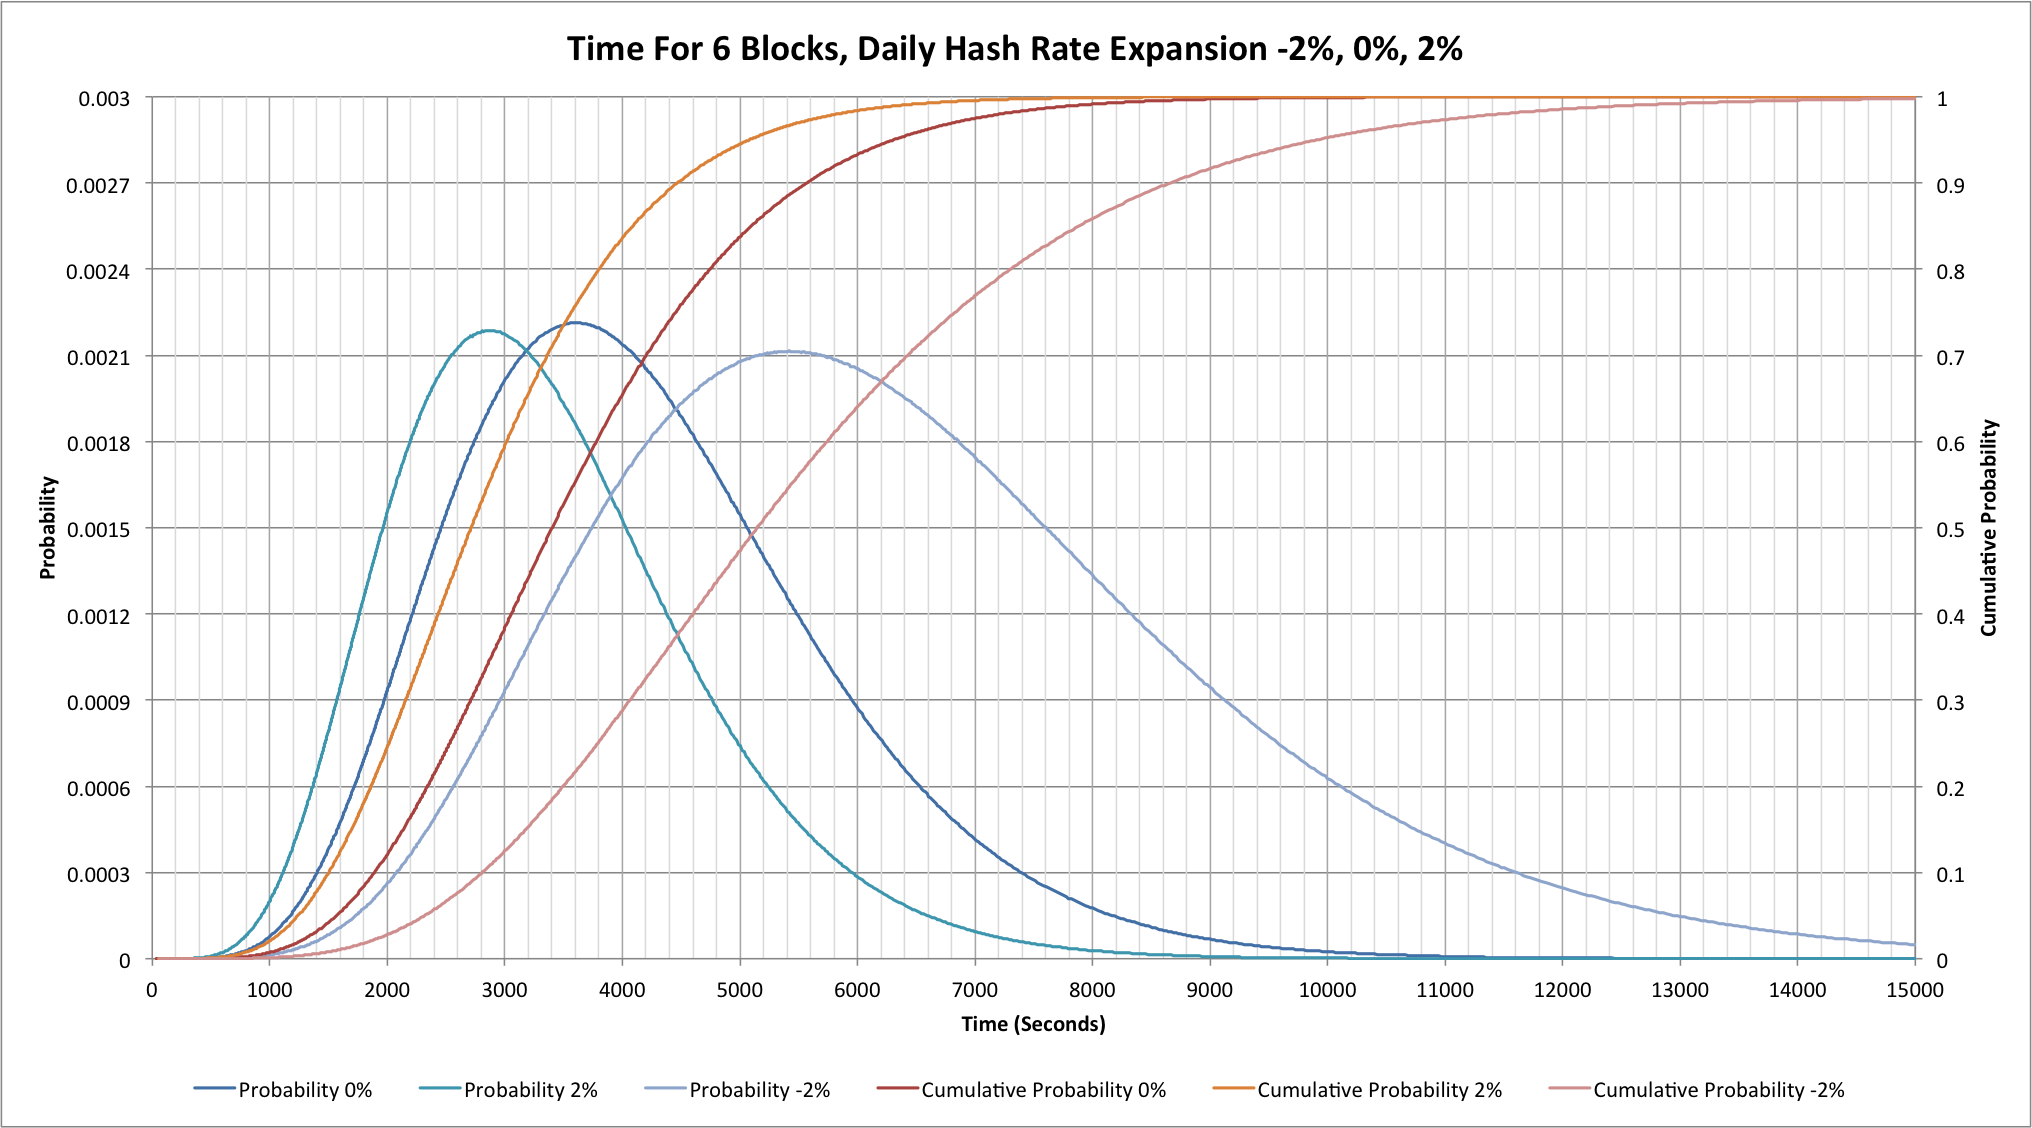 Probabilities for 6 Bitcoin blocks being found during -2%, 0% and +2% hash rate changes per day